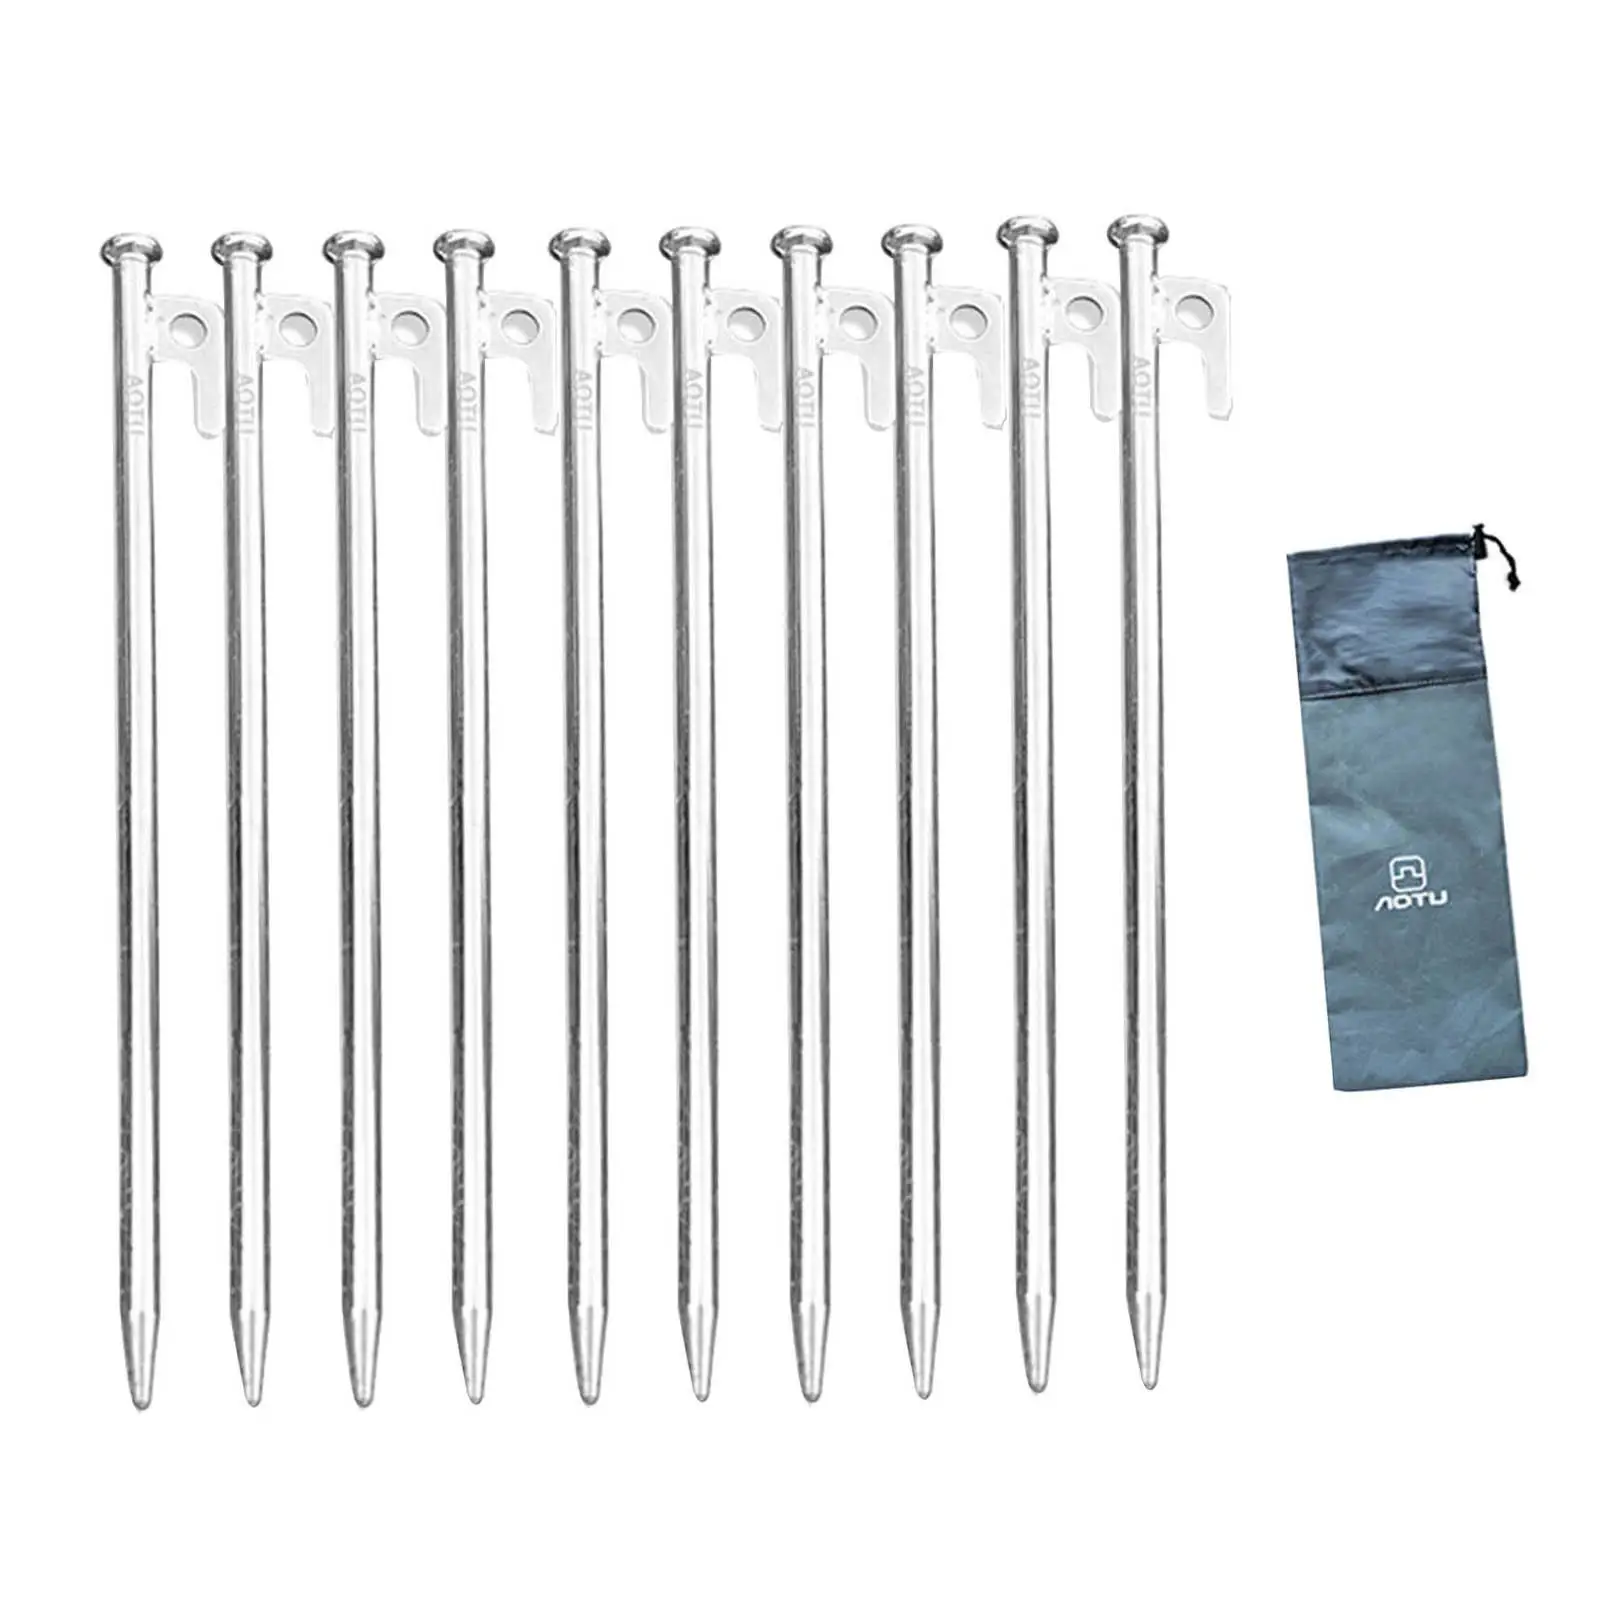 Kingfisher Galvanised Steel Tent Ground Pegs Pack of 10 Silver 